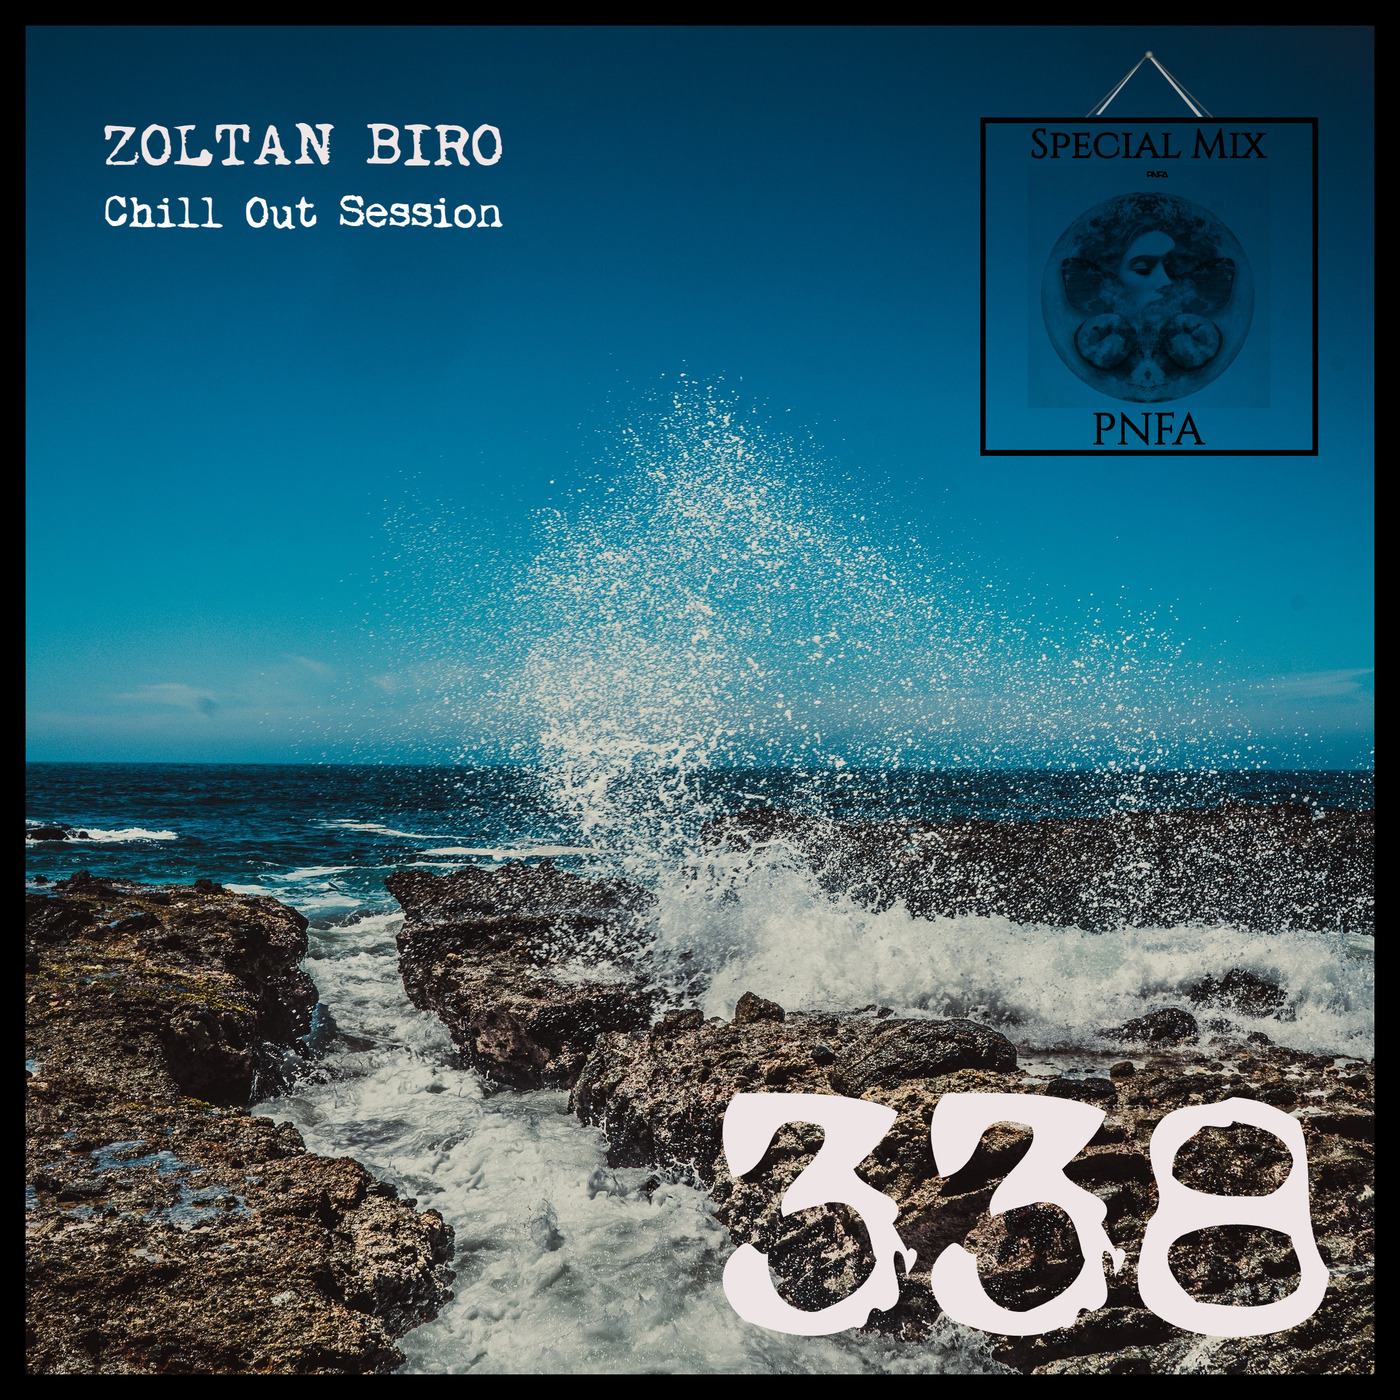 Zoltan Biro - Chill Out Session 338 [including: PNFA Special Mix]